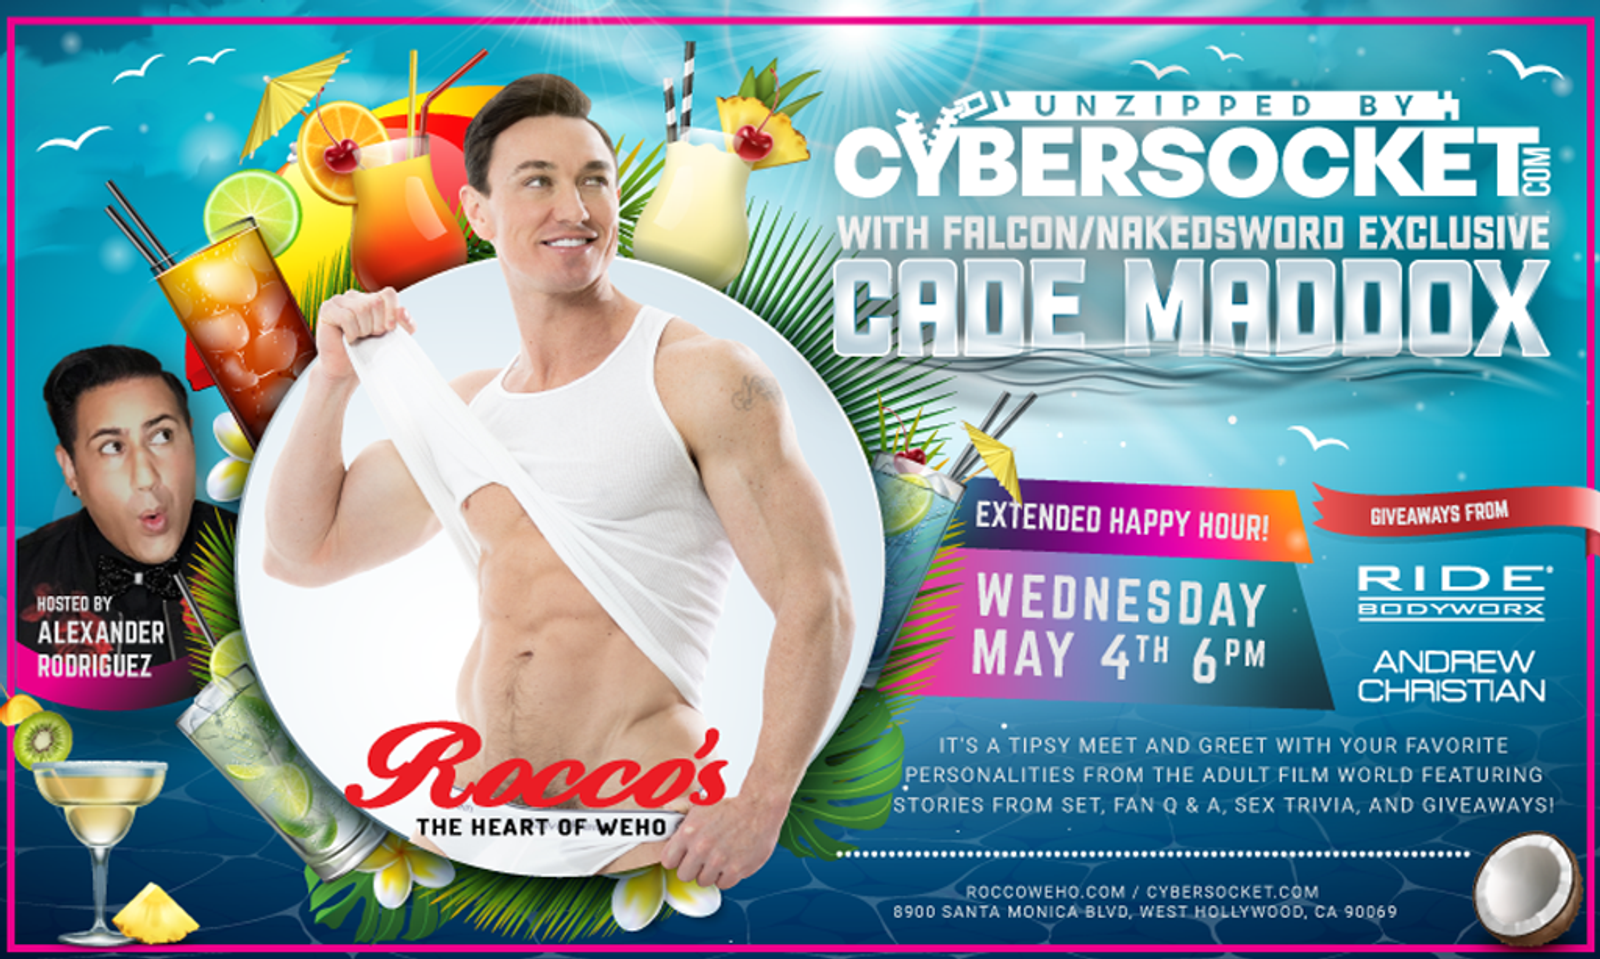 Cybersocket Debuts 'Unzipped' Happy Hour Event With Cade Maddox